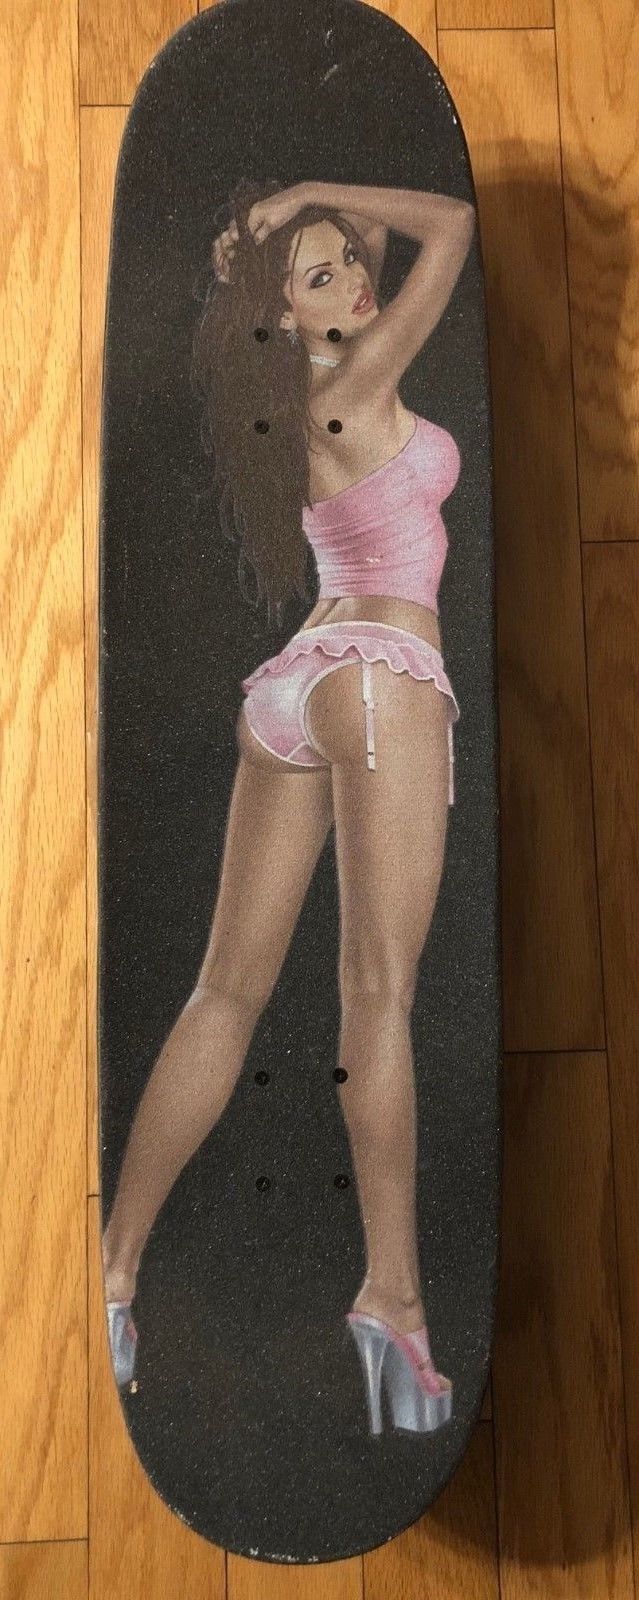 Skateboard With Pinup